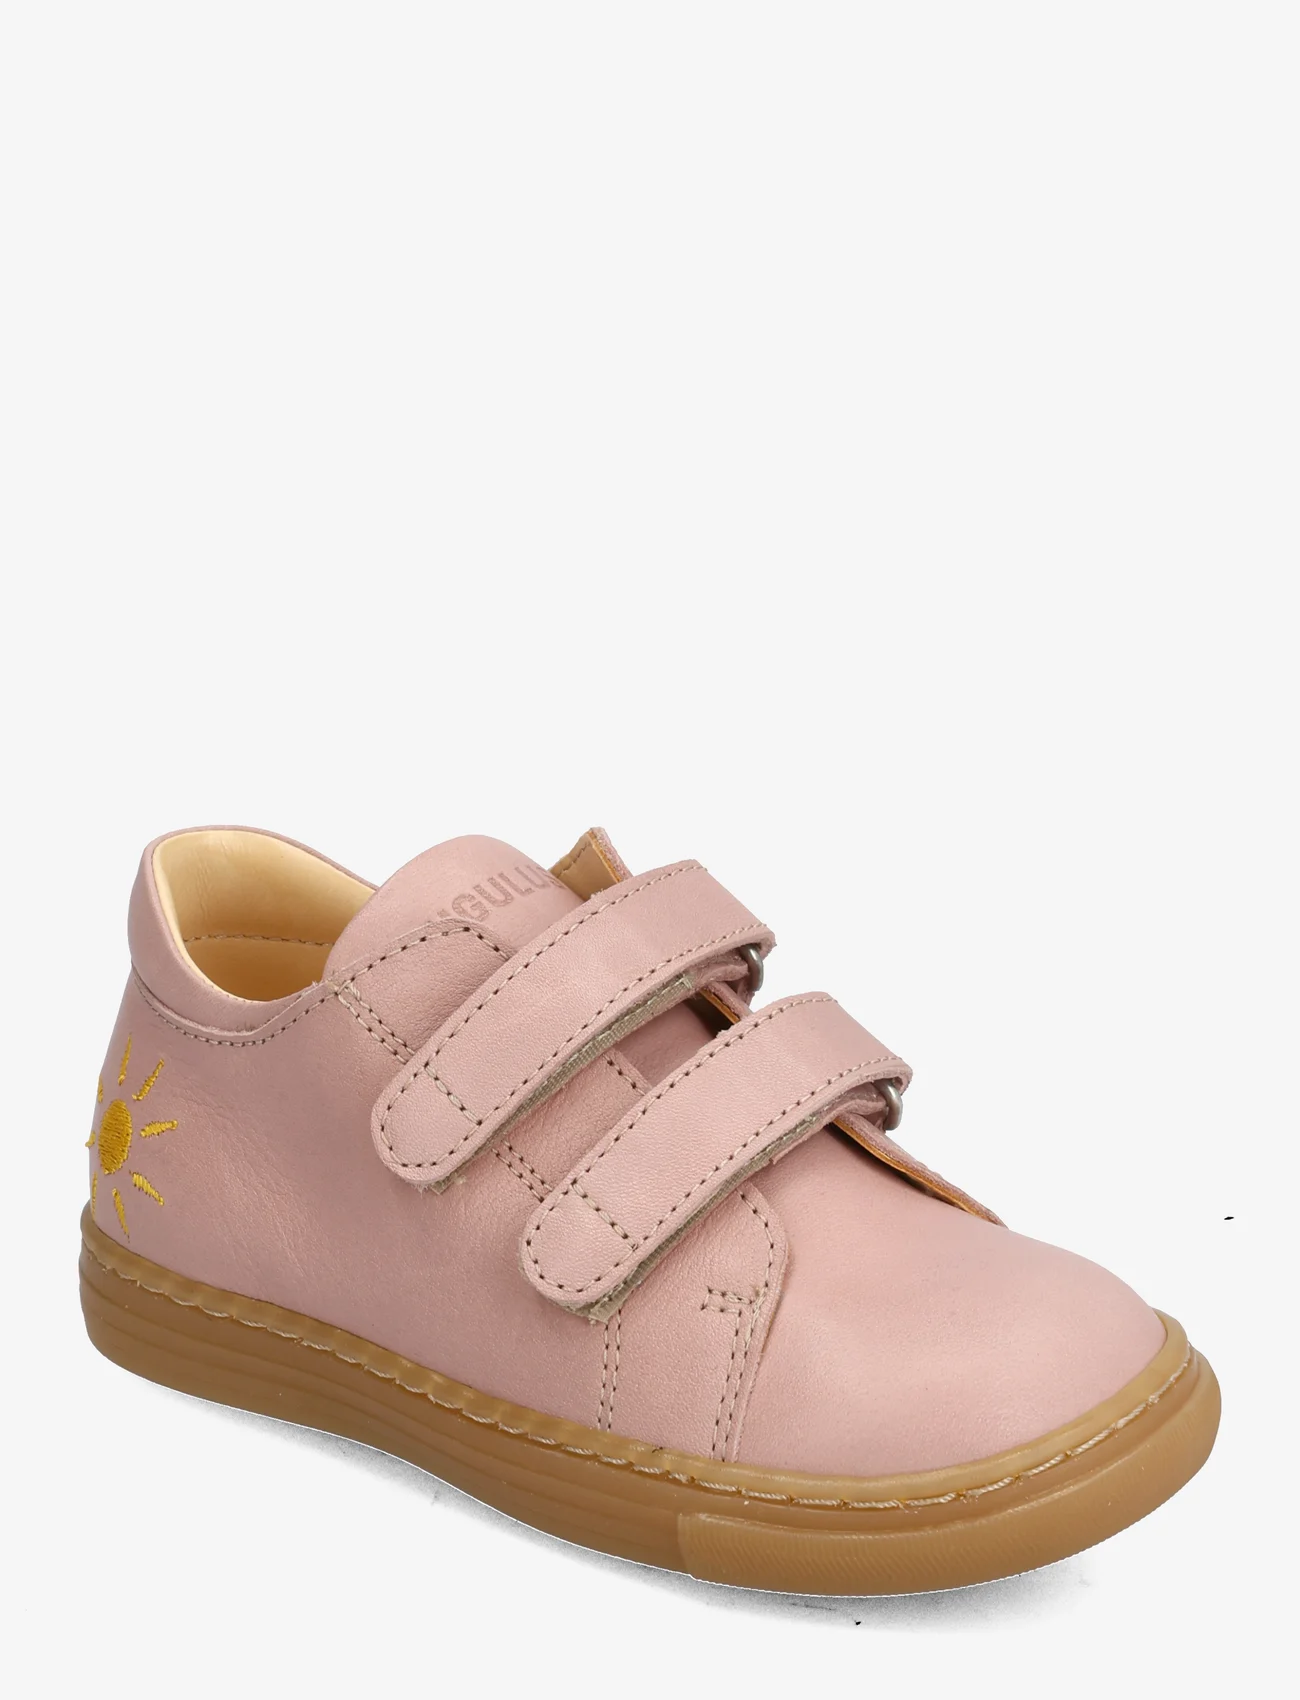 ANGULUS - Shoes - flat - with velcro - gode sommertilbud - 1730 rose - 0